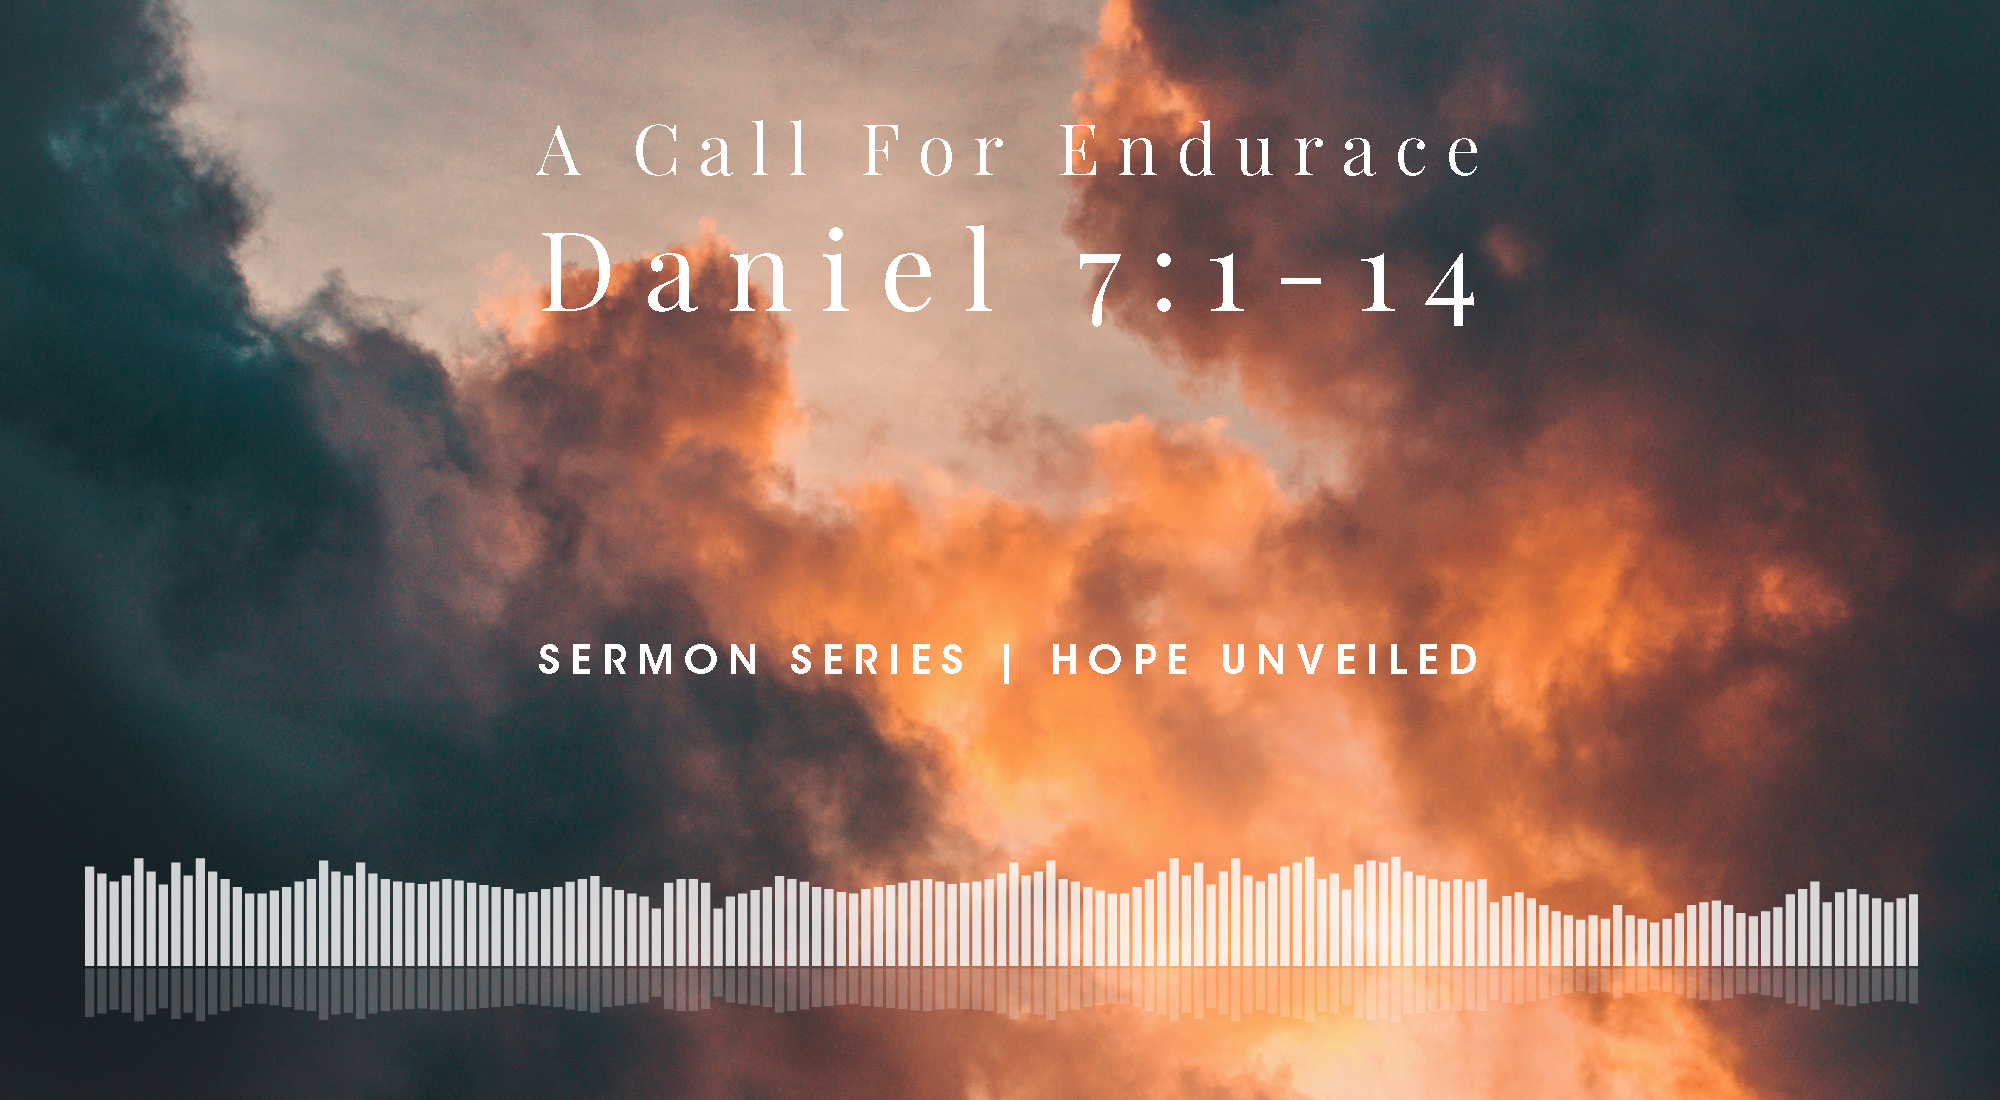 A Call For Endurance, Daniel 7:1-14 From Our Hope Unveiled Sermon Series